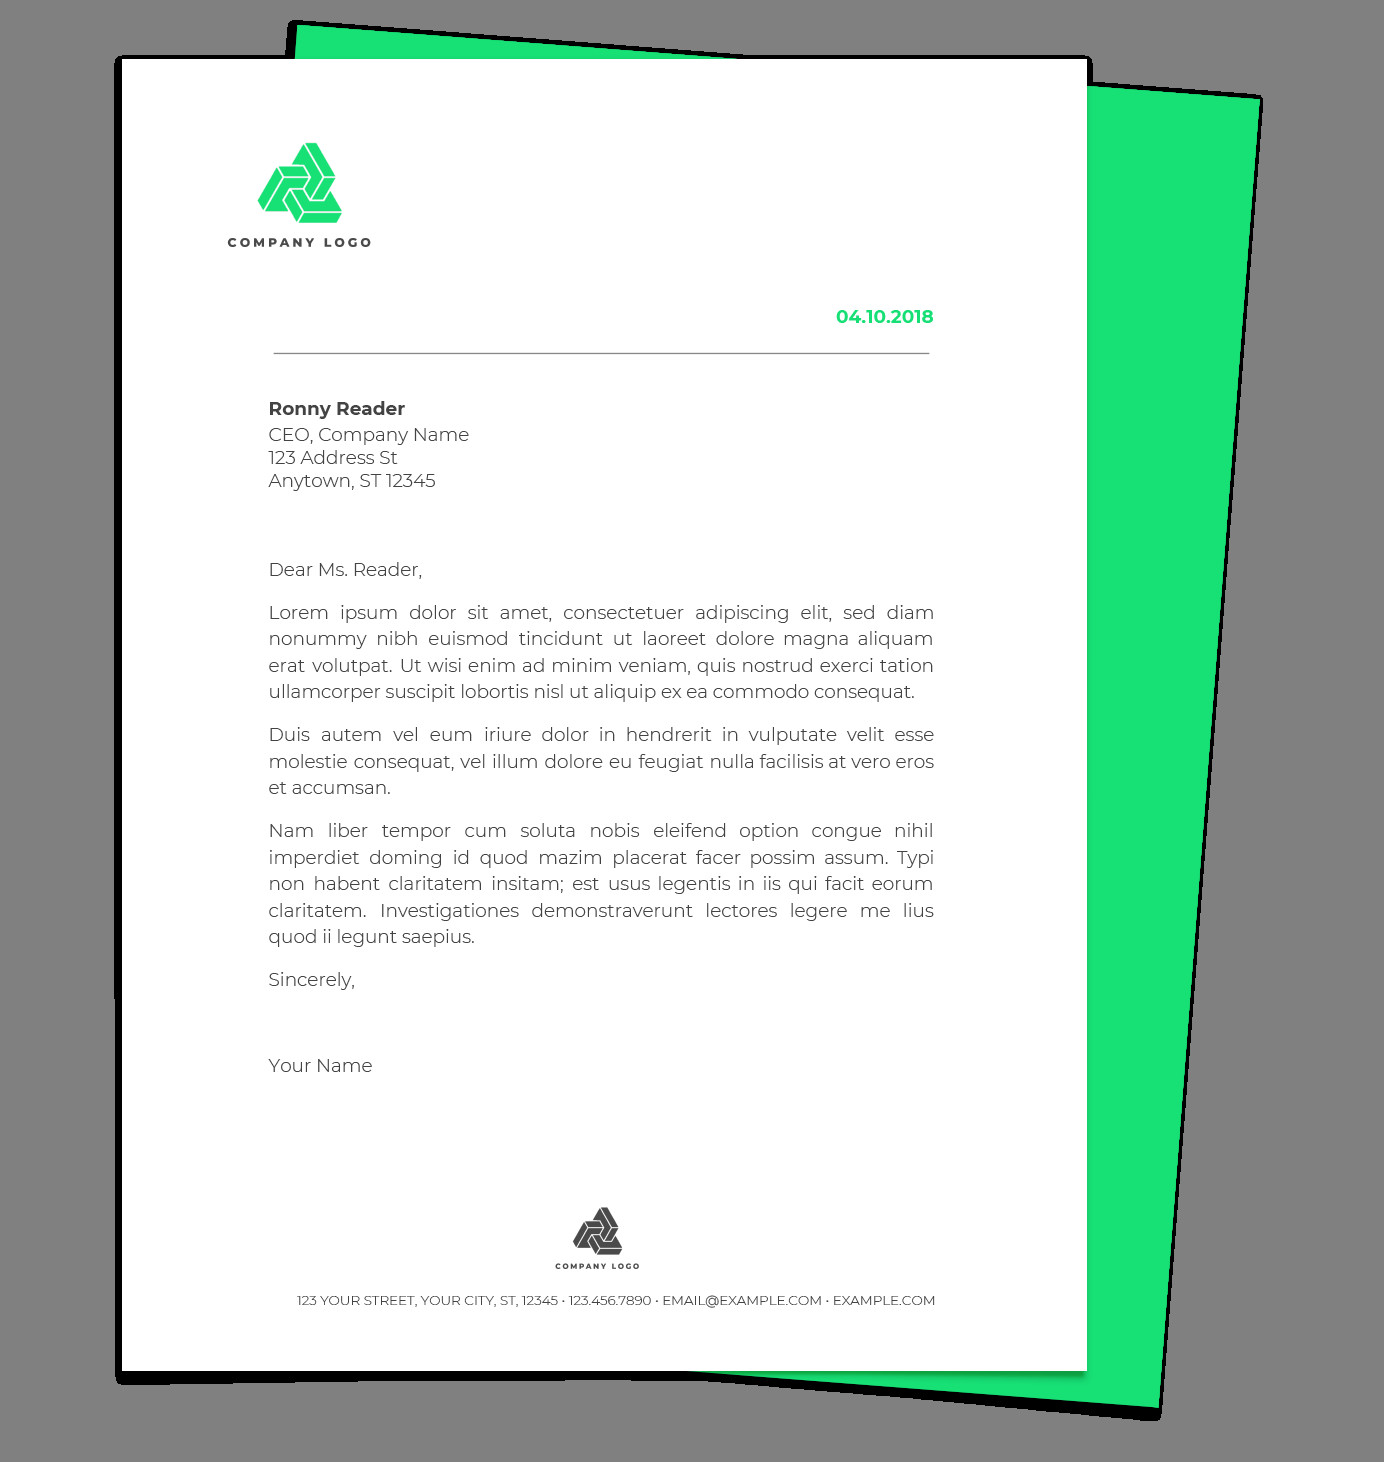 Free Letterhead Templates for Google Docs and Word